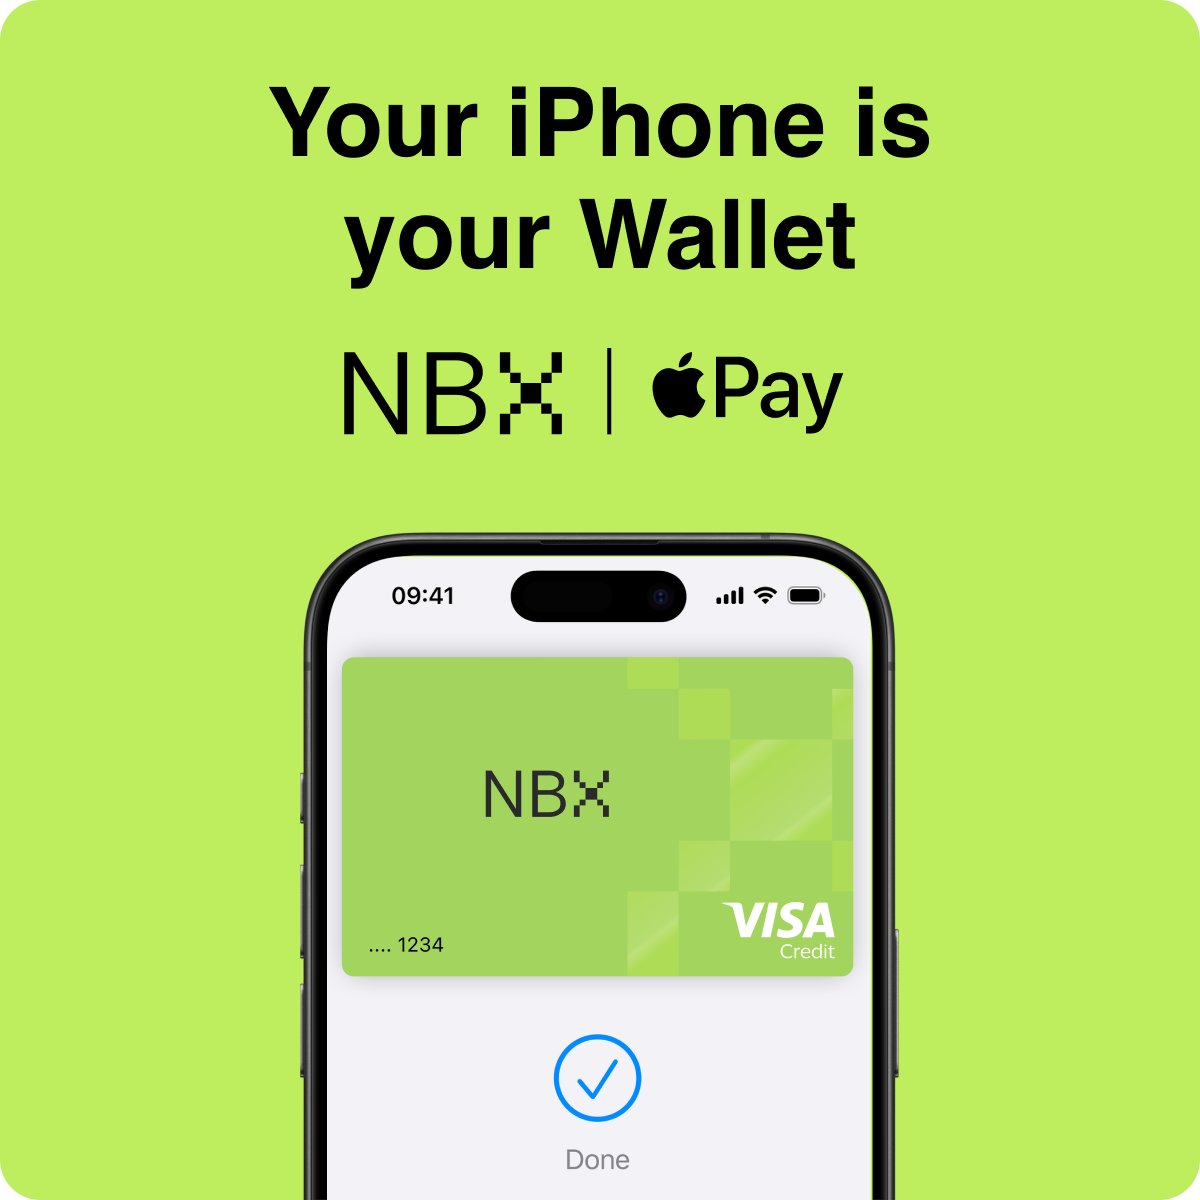 Apple Pay is an easy, secure, and private way to pay. Now Available on your Apple devices. #nbx #card #iphone #apple